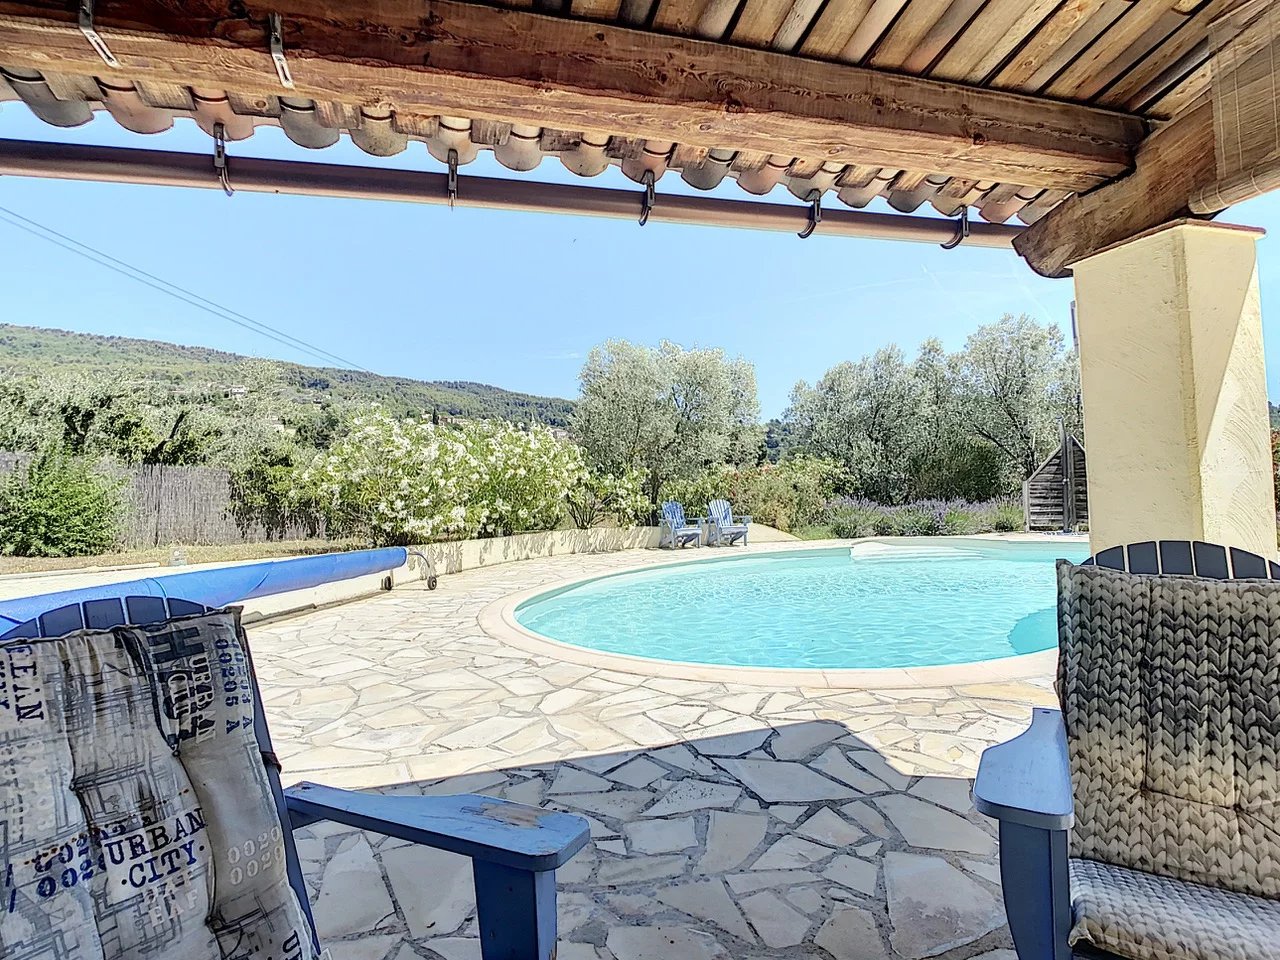 Cozy villa with pool, walking distance to the bakery shop